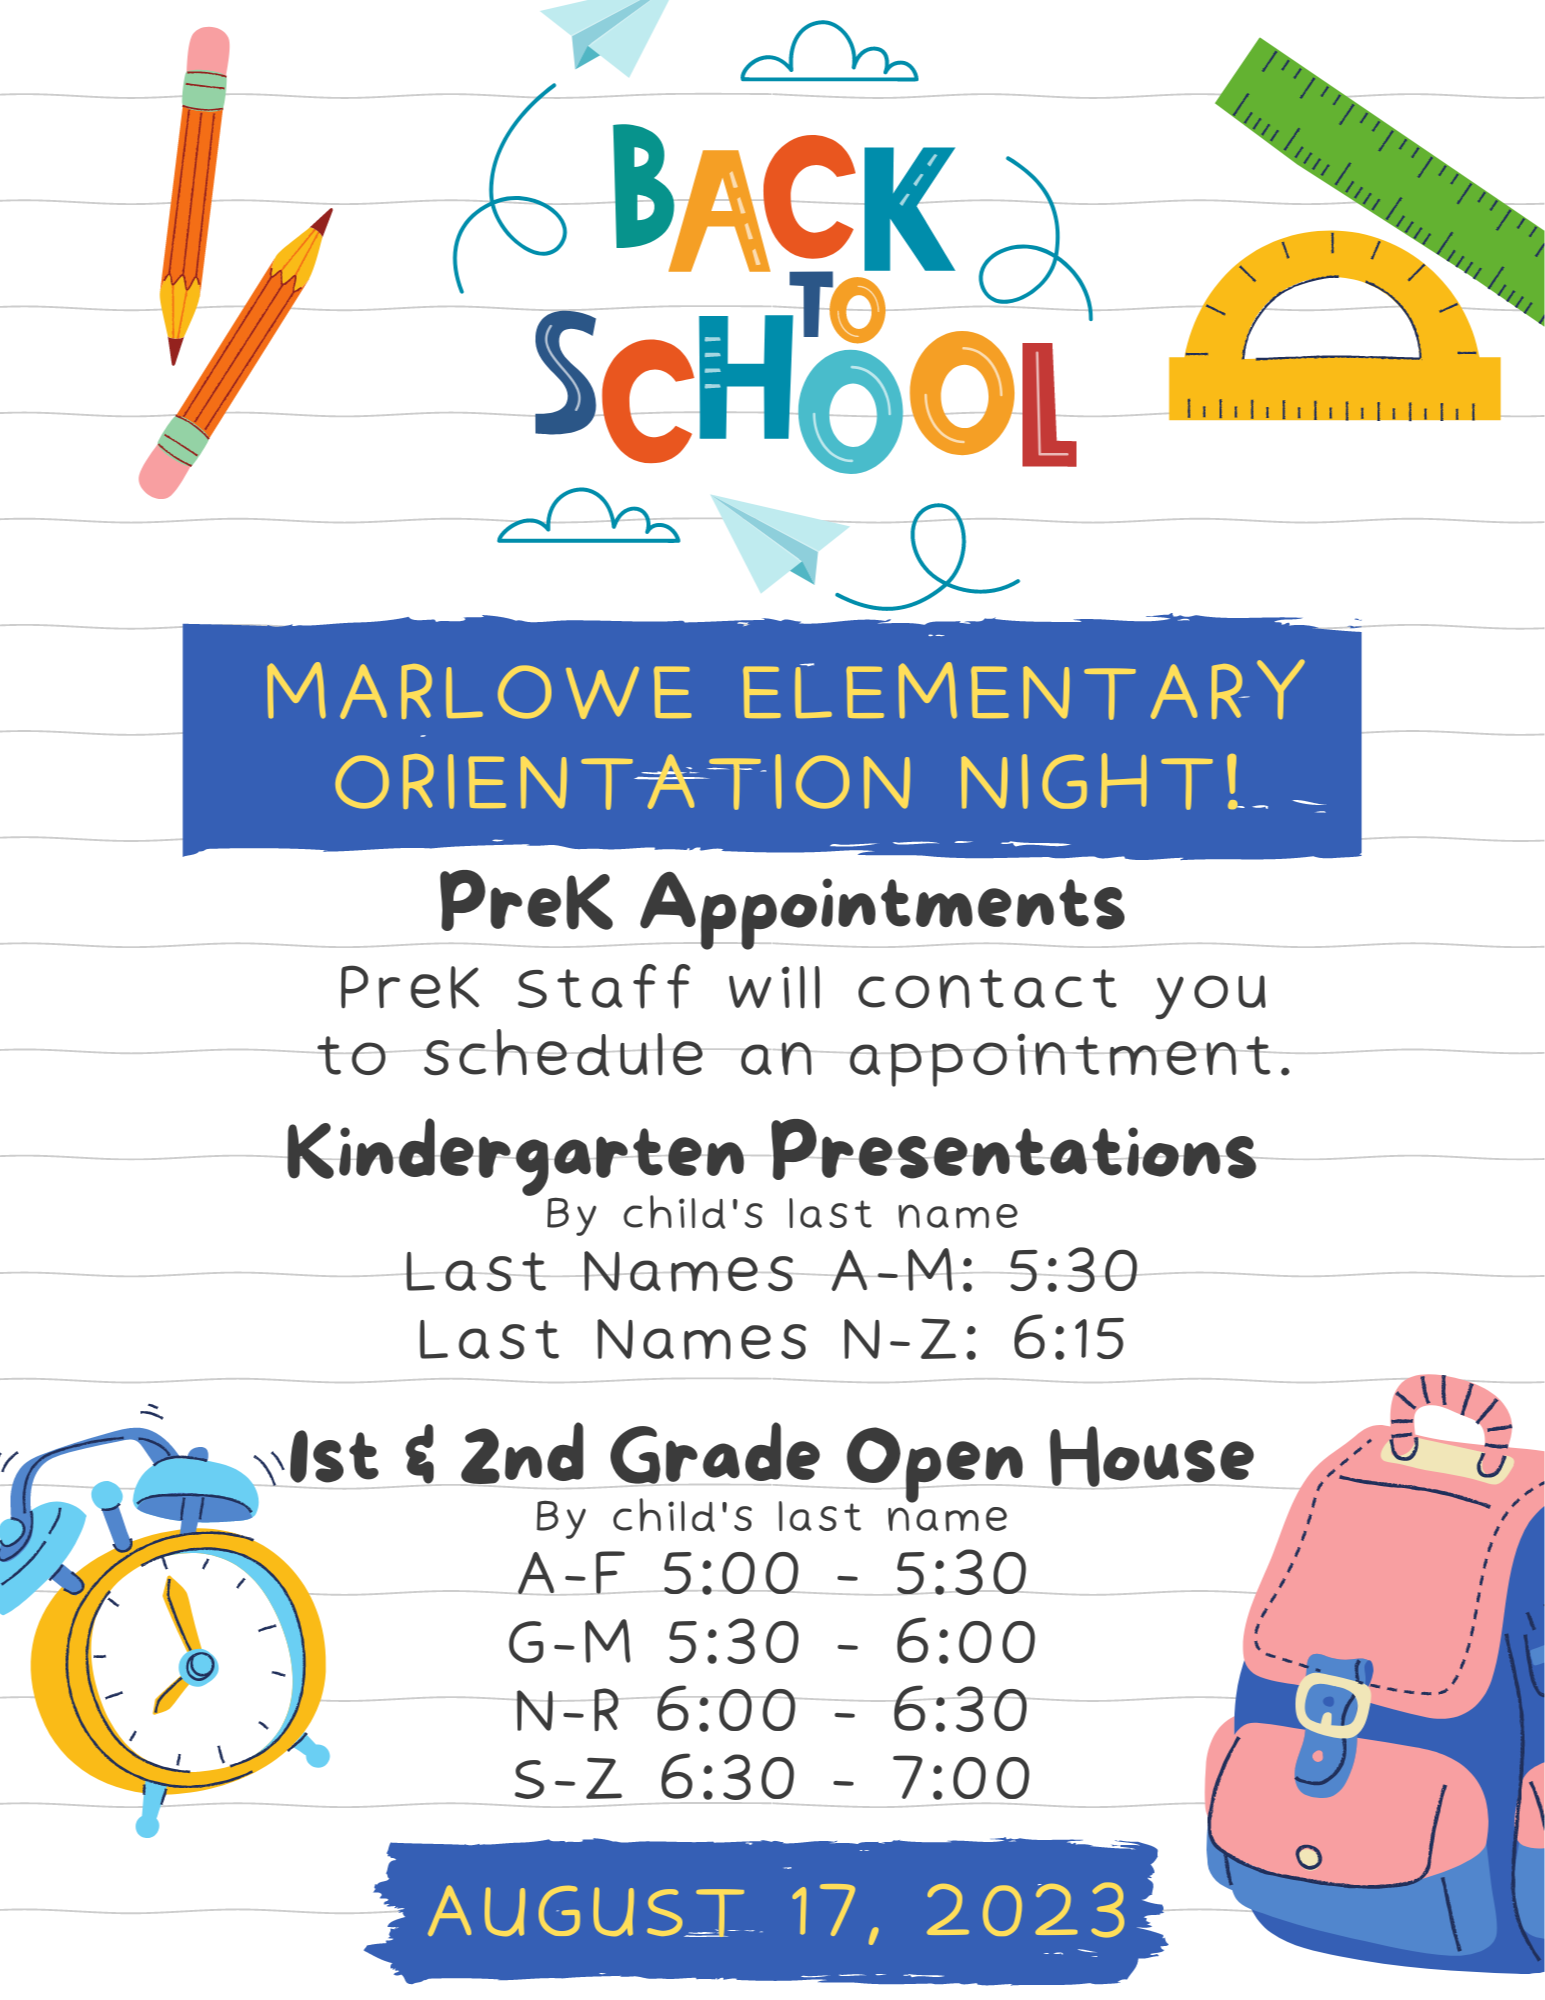 Student orientation will be held on August 17, 2023, at the specific times listed below. If you are a Pre-K student, your teacher will contact you with your appointment time.  Kindergarten:  Last Names A-M: 5:30 p.m.  Last Names N-Z: 6:15 p.m.  1st & 2nd Grade:  Last Names A-F: 5 p.m. - 5:30 p.m.  Last Names G-M: 5:30 p.m. - 6 p.m.  Last Names N-R: 6 p.m. to 6:30 p.m.  Last Names S-Z: 6:30 p.m. to 7 p.m.